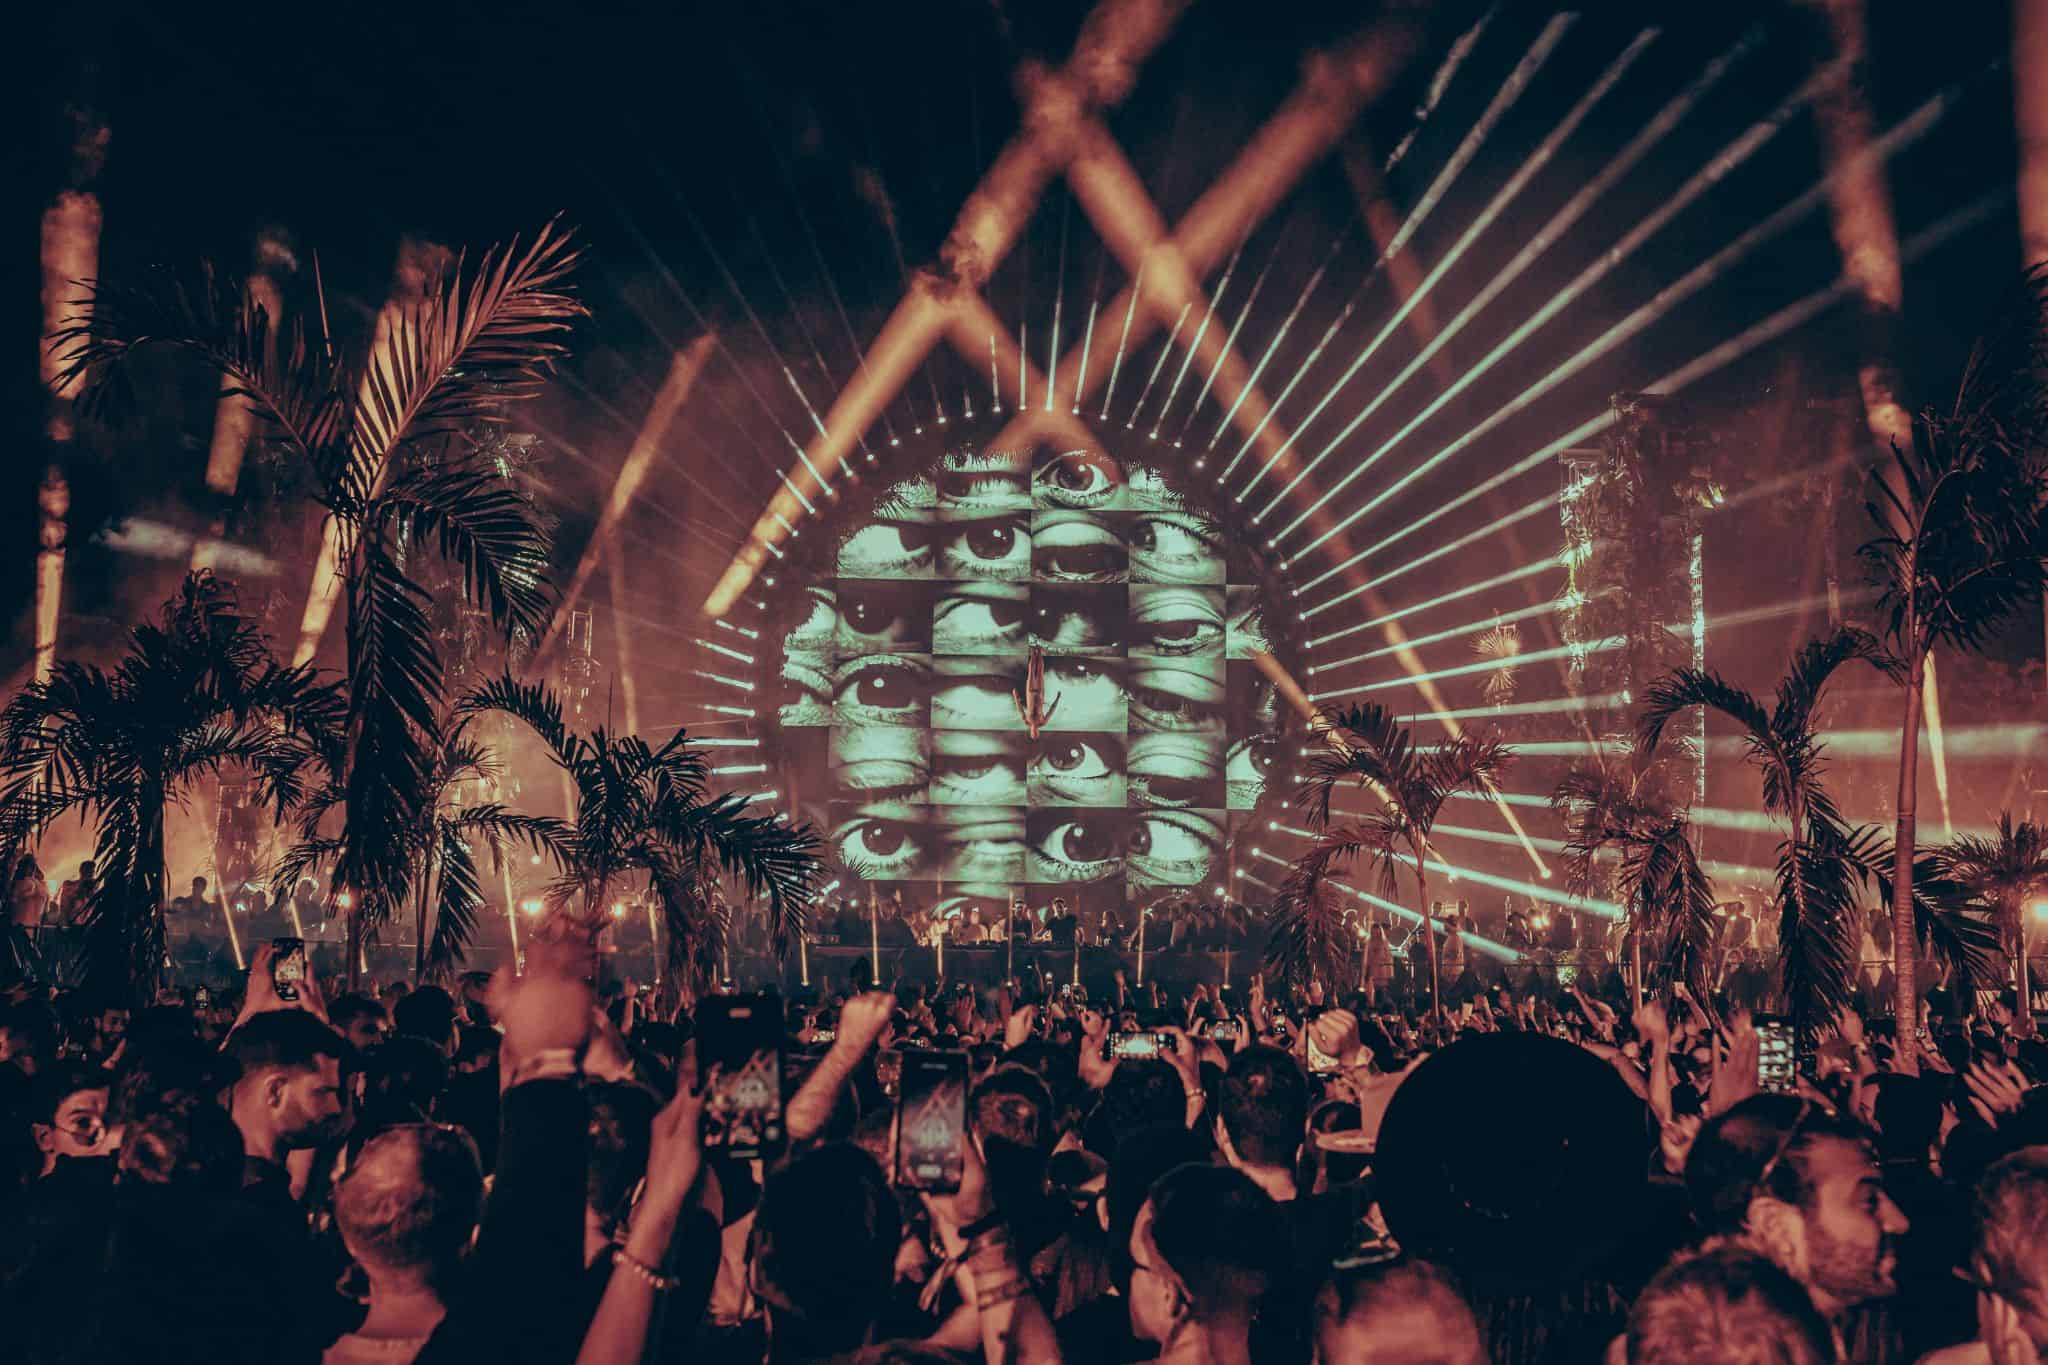 Zamna announces cancellation of all Miami Music Week events after devastating incident